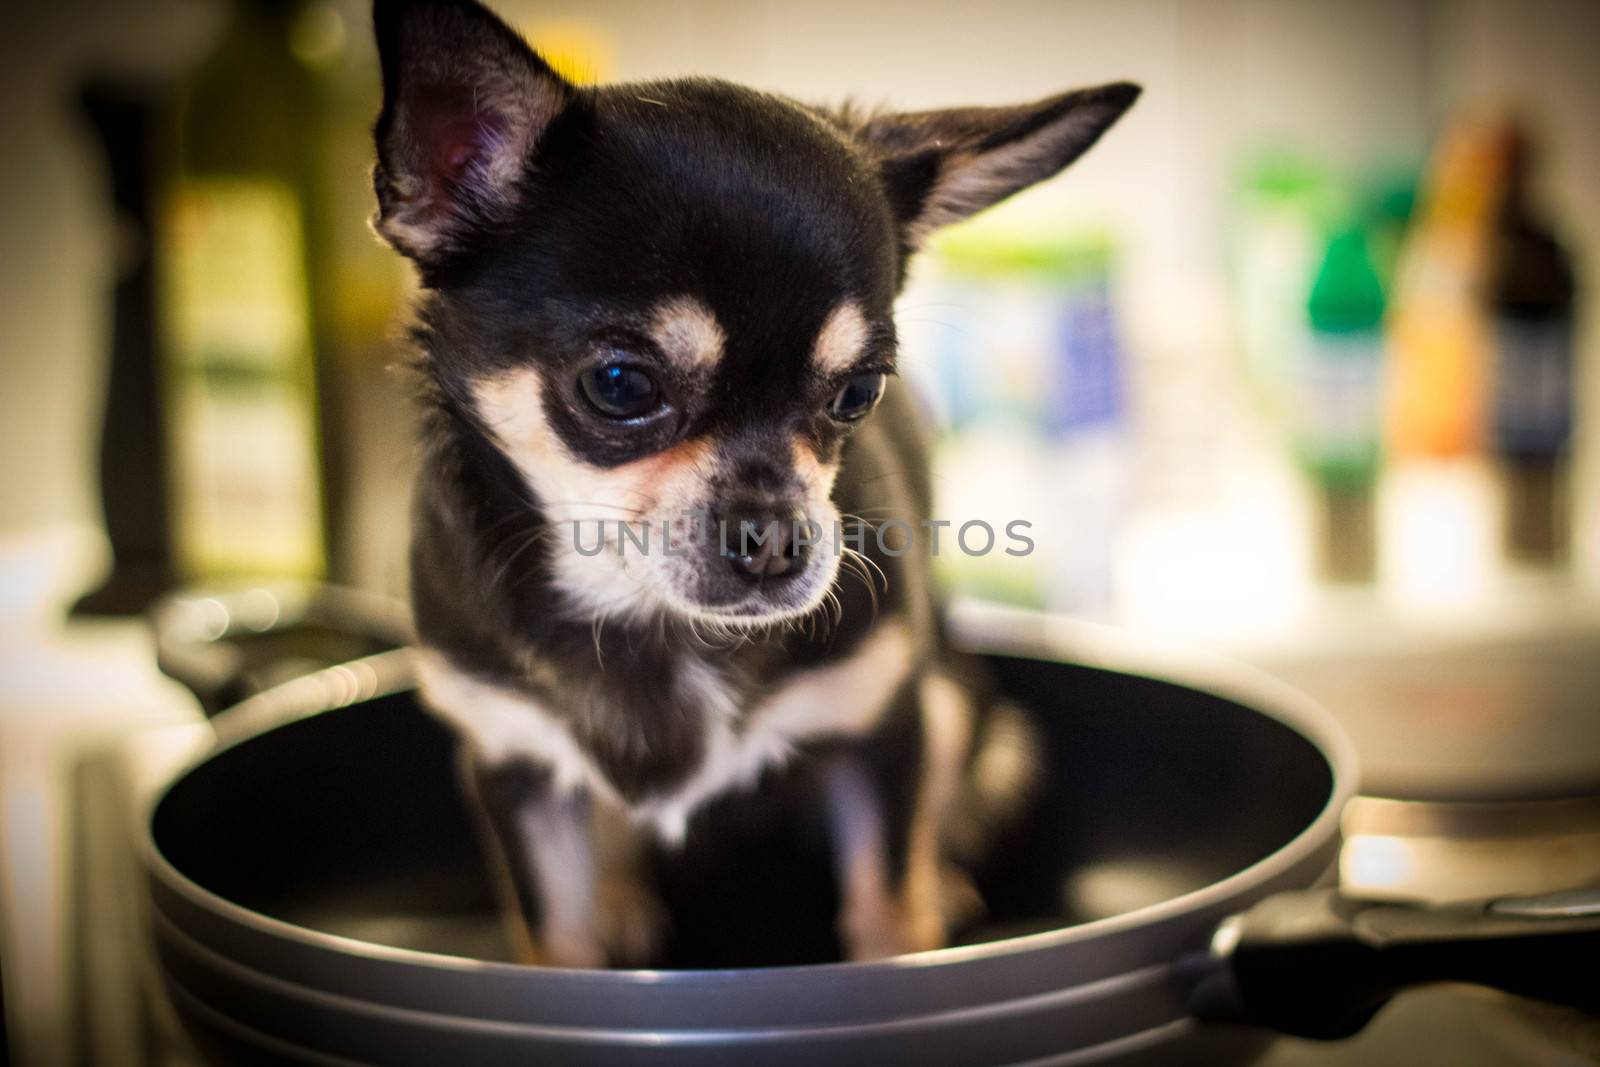 Chihuahua in a pan by PS3000